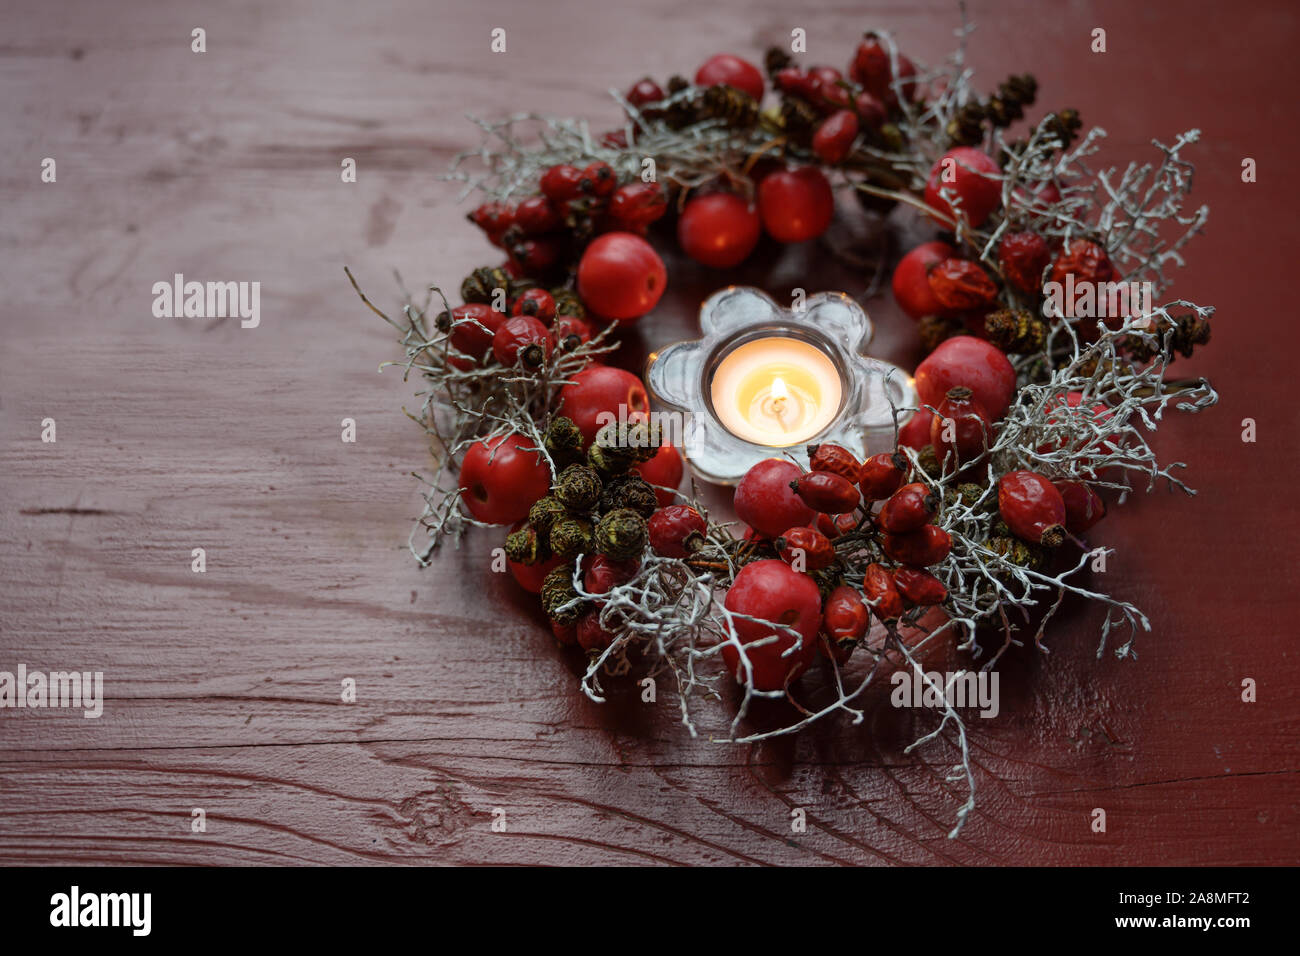 Natural wreath with rose hips and small apples around a burning candle on a red wooden table, seasonal decoration in autumn, Advent and Christmas time Stock Photo